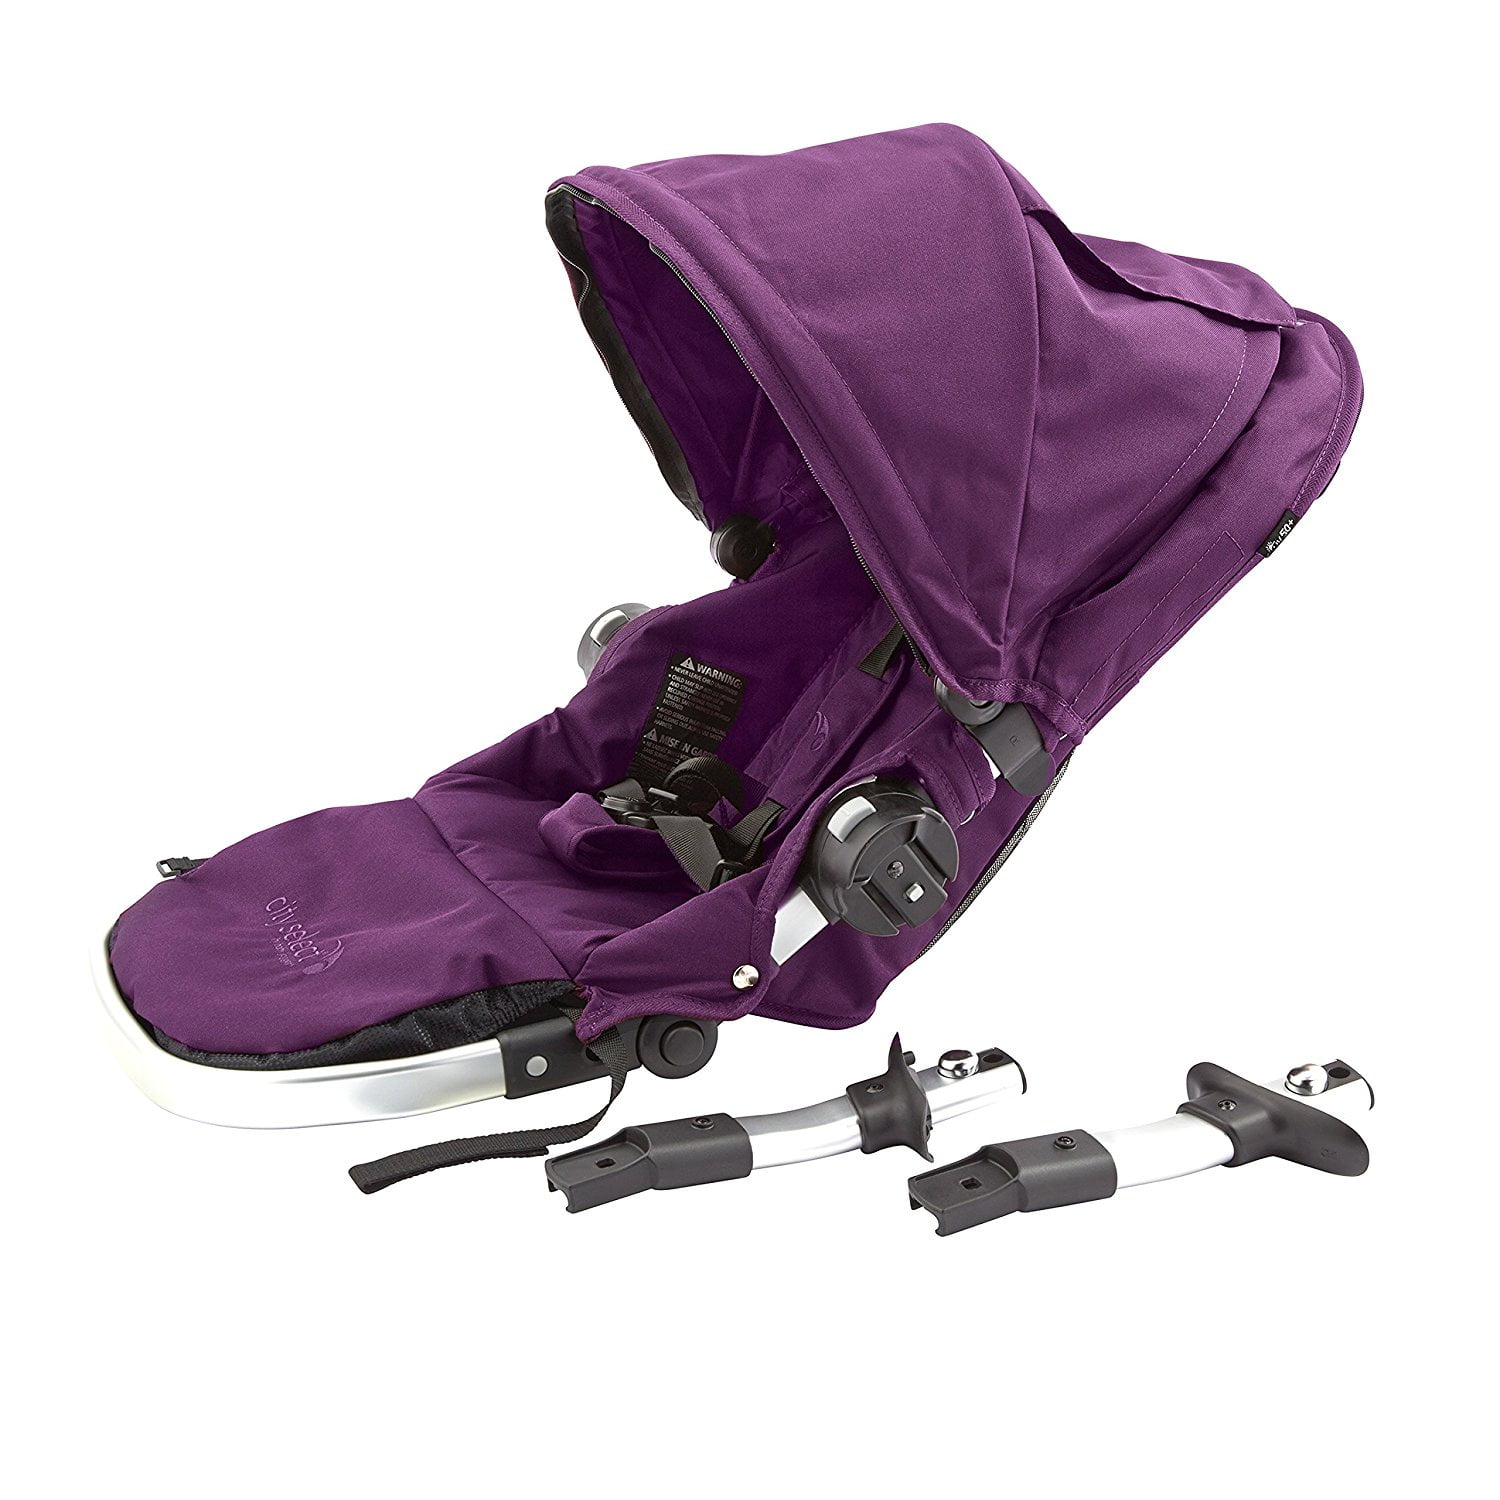 baby jogger city select second seat amethyst